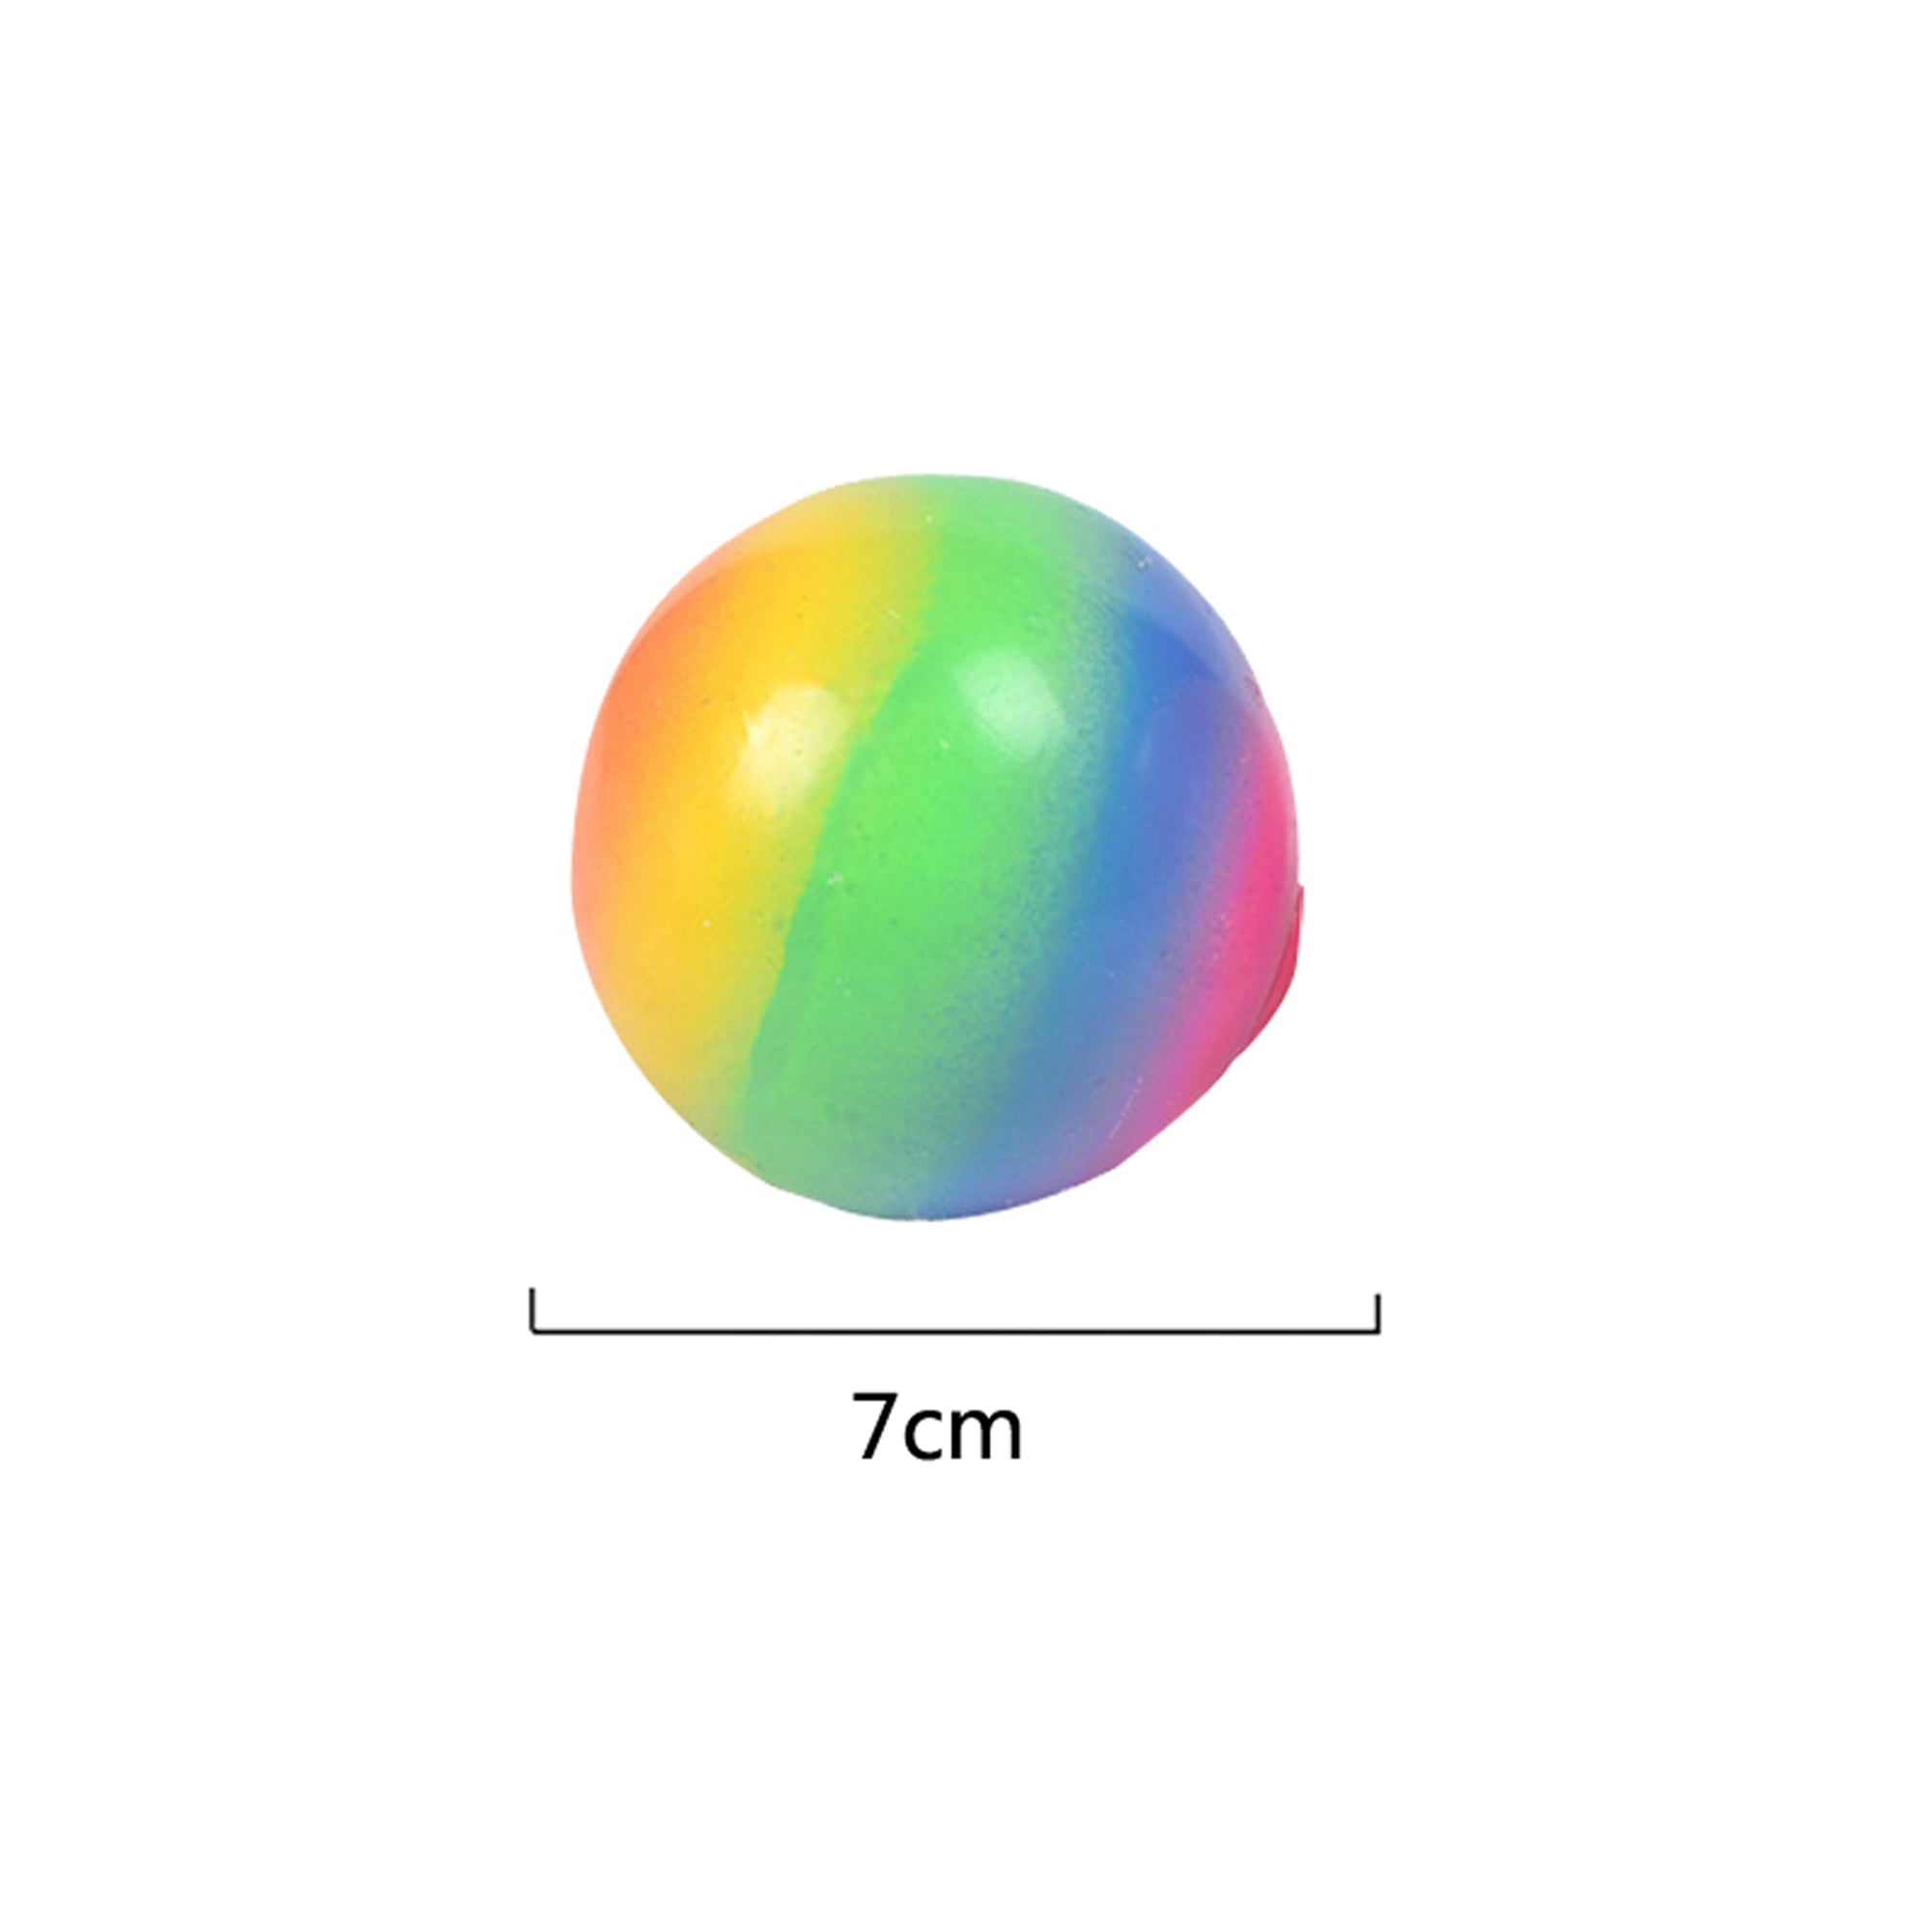 Details about   Rainbow Ball Stress Ball Squeeze Relief Novelty Squishy Soft Funny Joke Toy Hot 